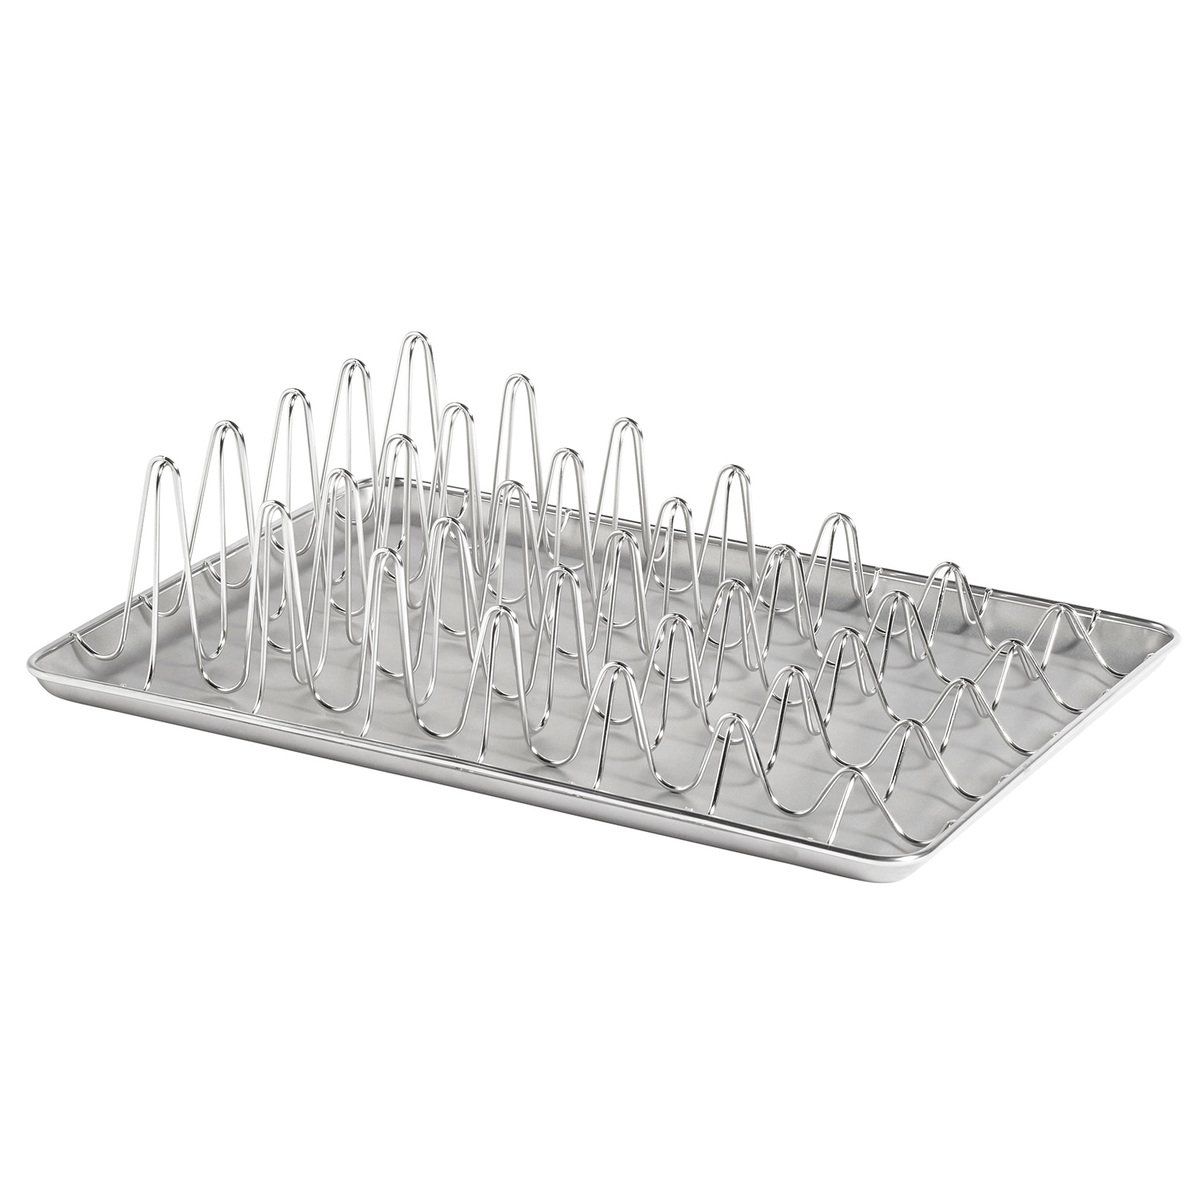 Finnish the Dishes: Simple Nordic Design Beats Dishwashers & Drying Racks -  99% Invisible